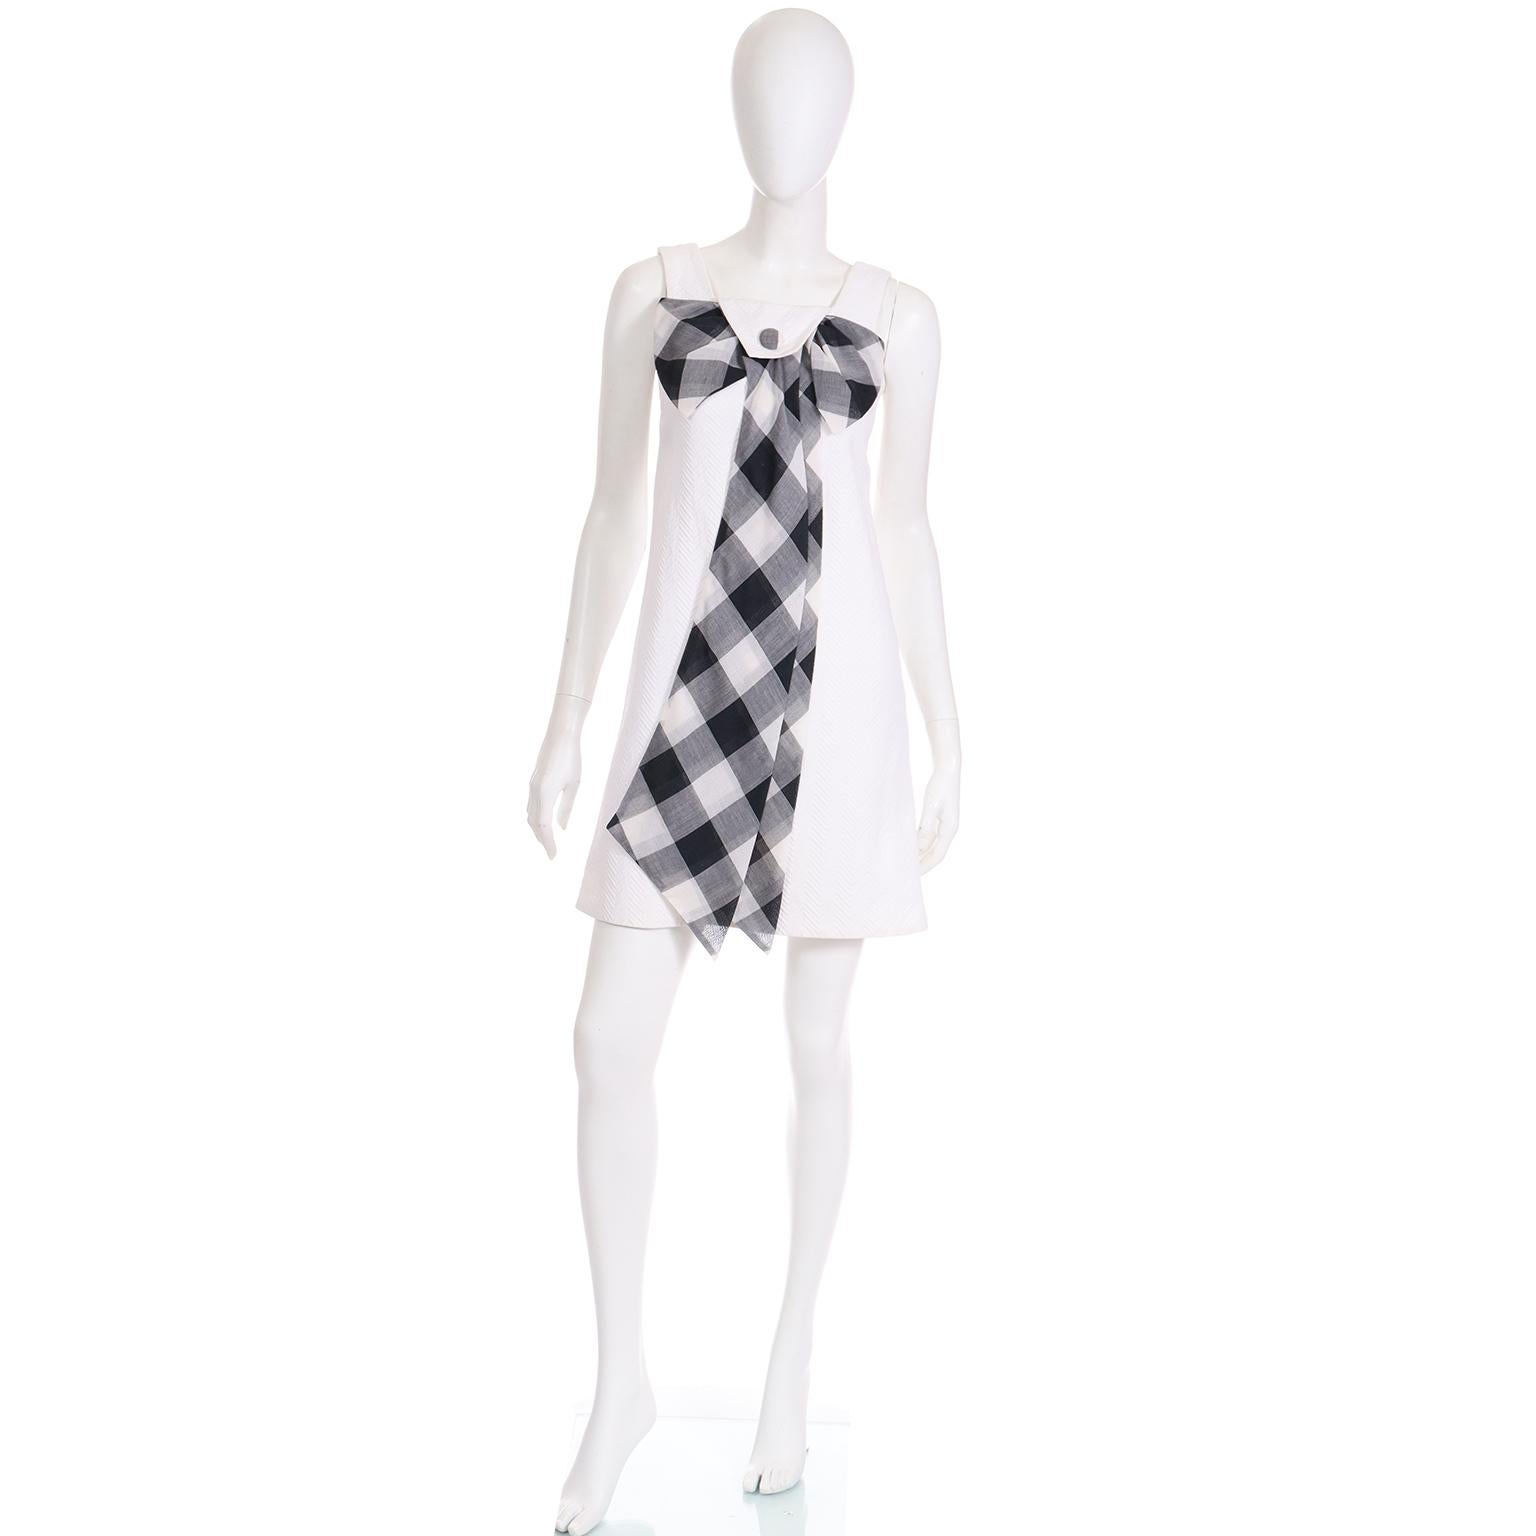 This is a really fun vintage 1960's white cotton pique dress with a dramatic black and white plaid voile bow with a double sash that extends to the hem. There is even a plaid covered button on a flap that goes over the top of the bow as an added